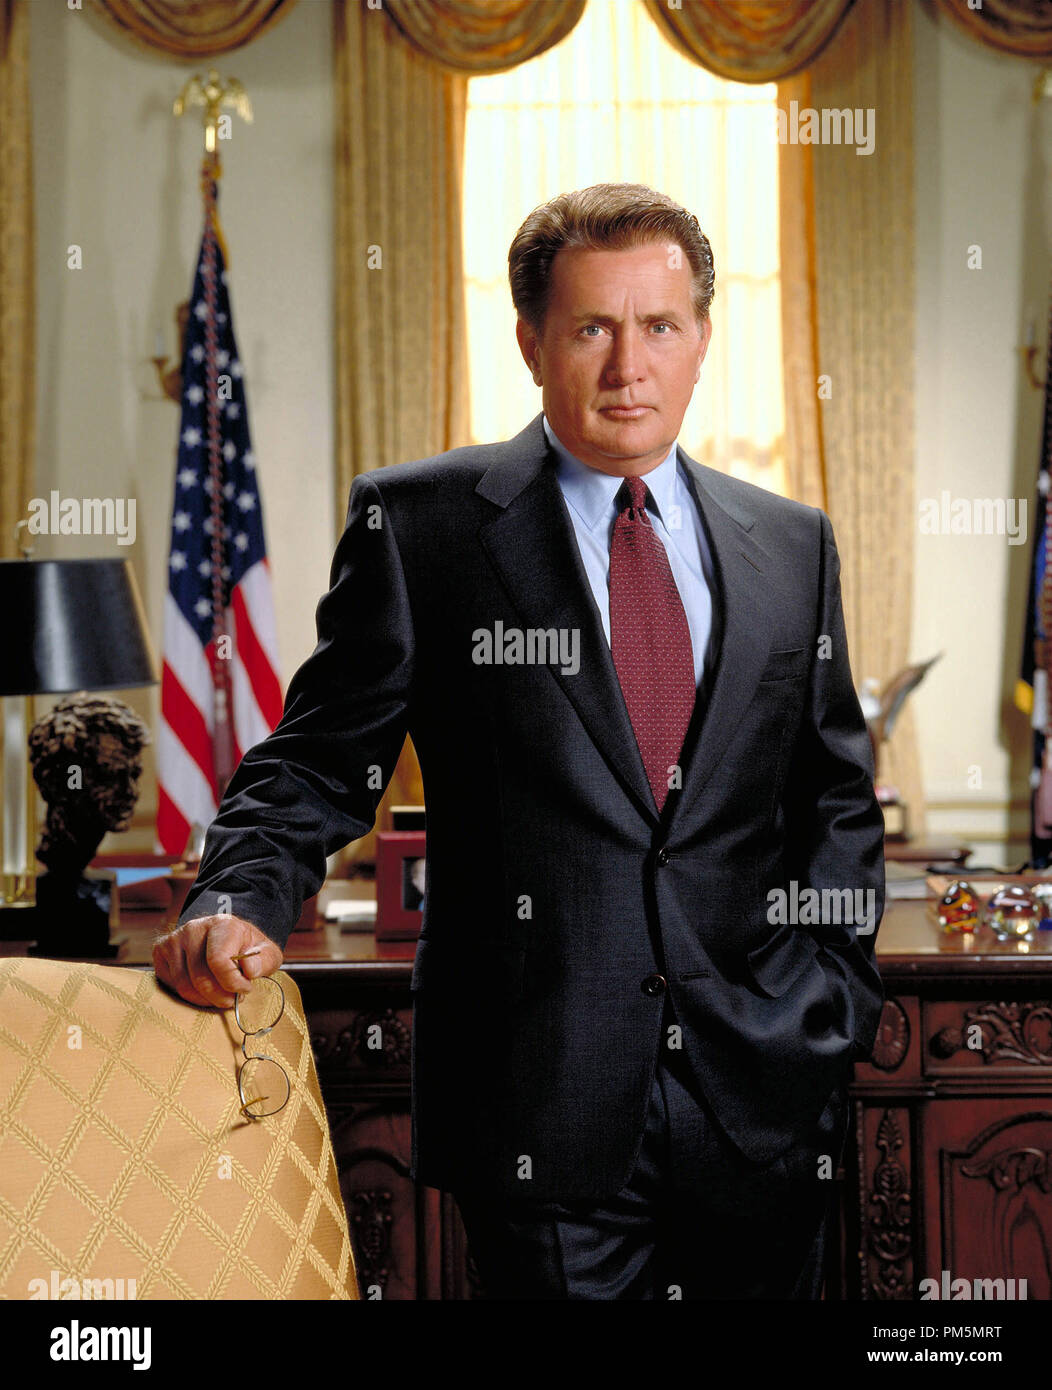 Film Still / Publicity Still from 'The West Wing' Martin Sheen circa 2001 Photo credit: James Sorensen File Reference # 30847107THA  For Editorial Use Only -  All Rights Reserved Stock Photo